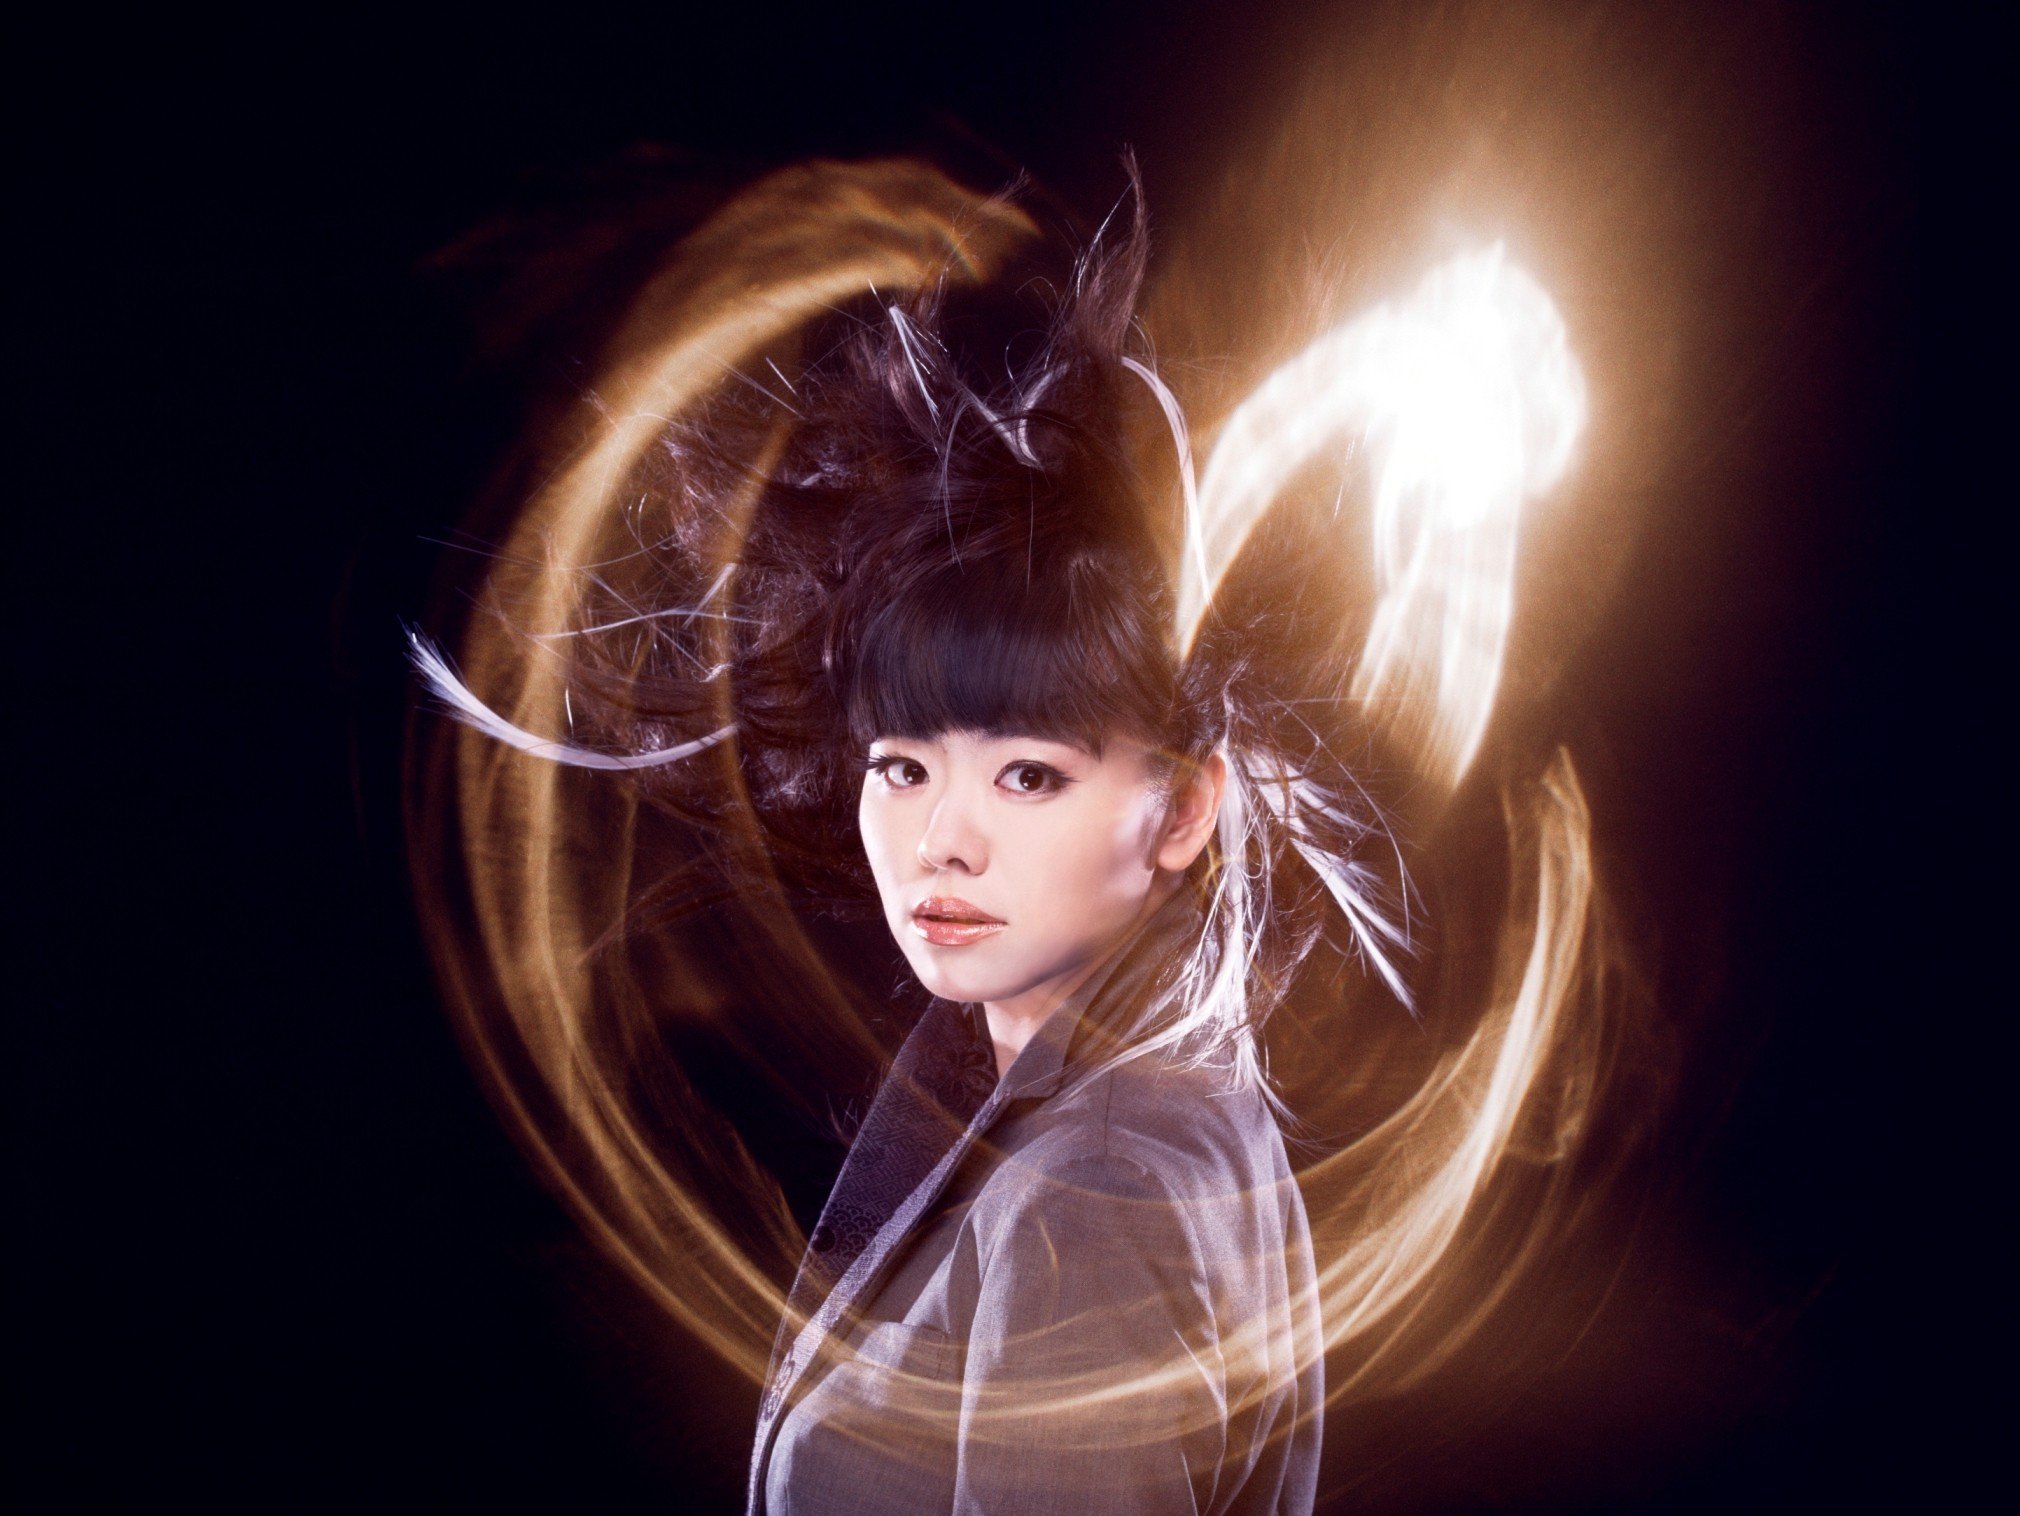 Japanese composer and pianist Hiromi Uehara will play with the Hong Kong Philharmonic Orchestra for two nights under the baton of Japanese conductor Ryusuke Numajiri. Photo: Handout